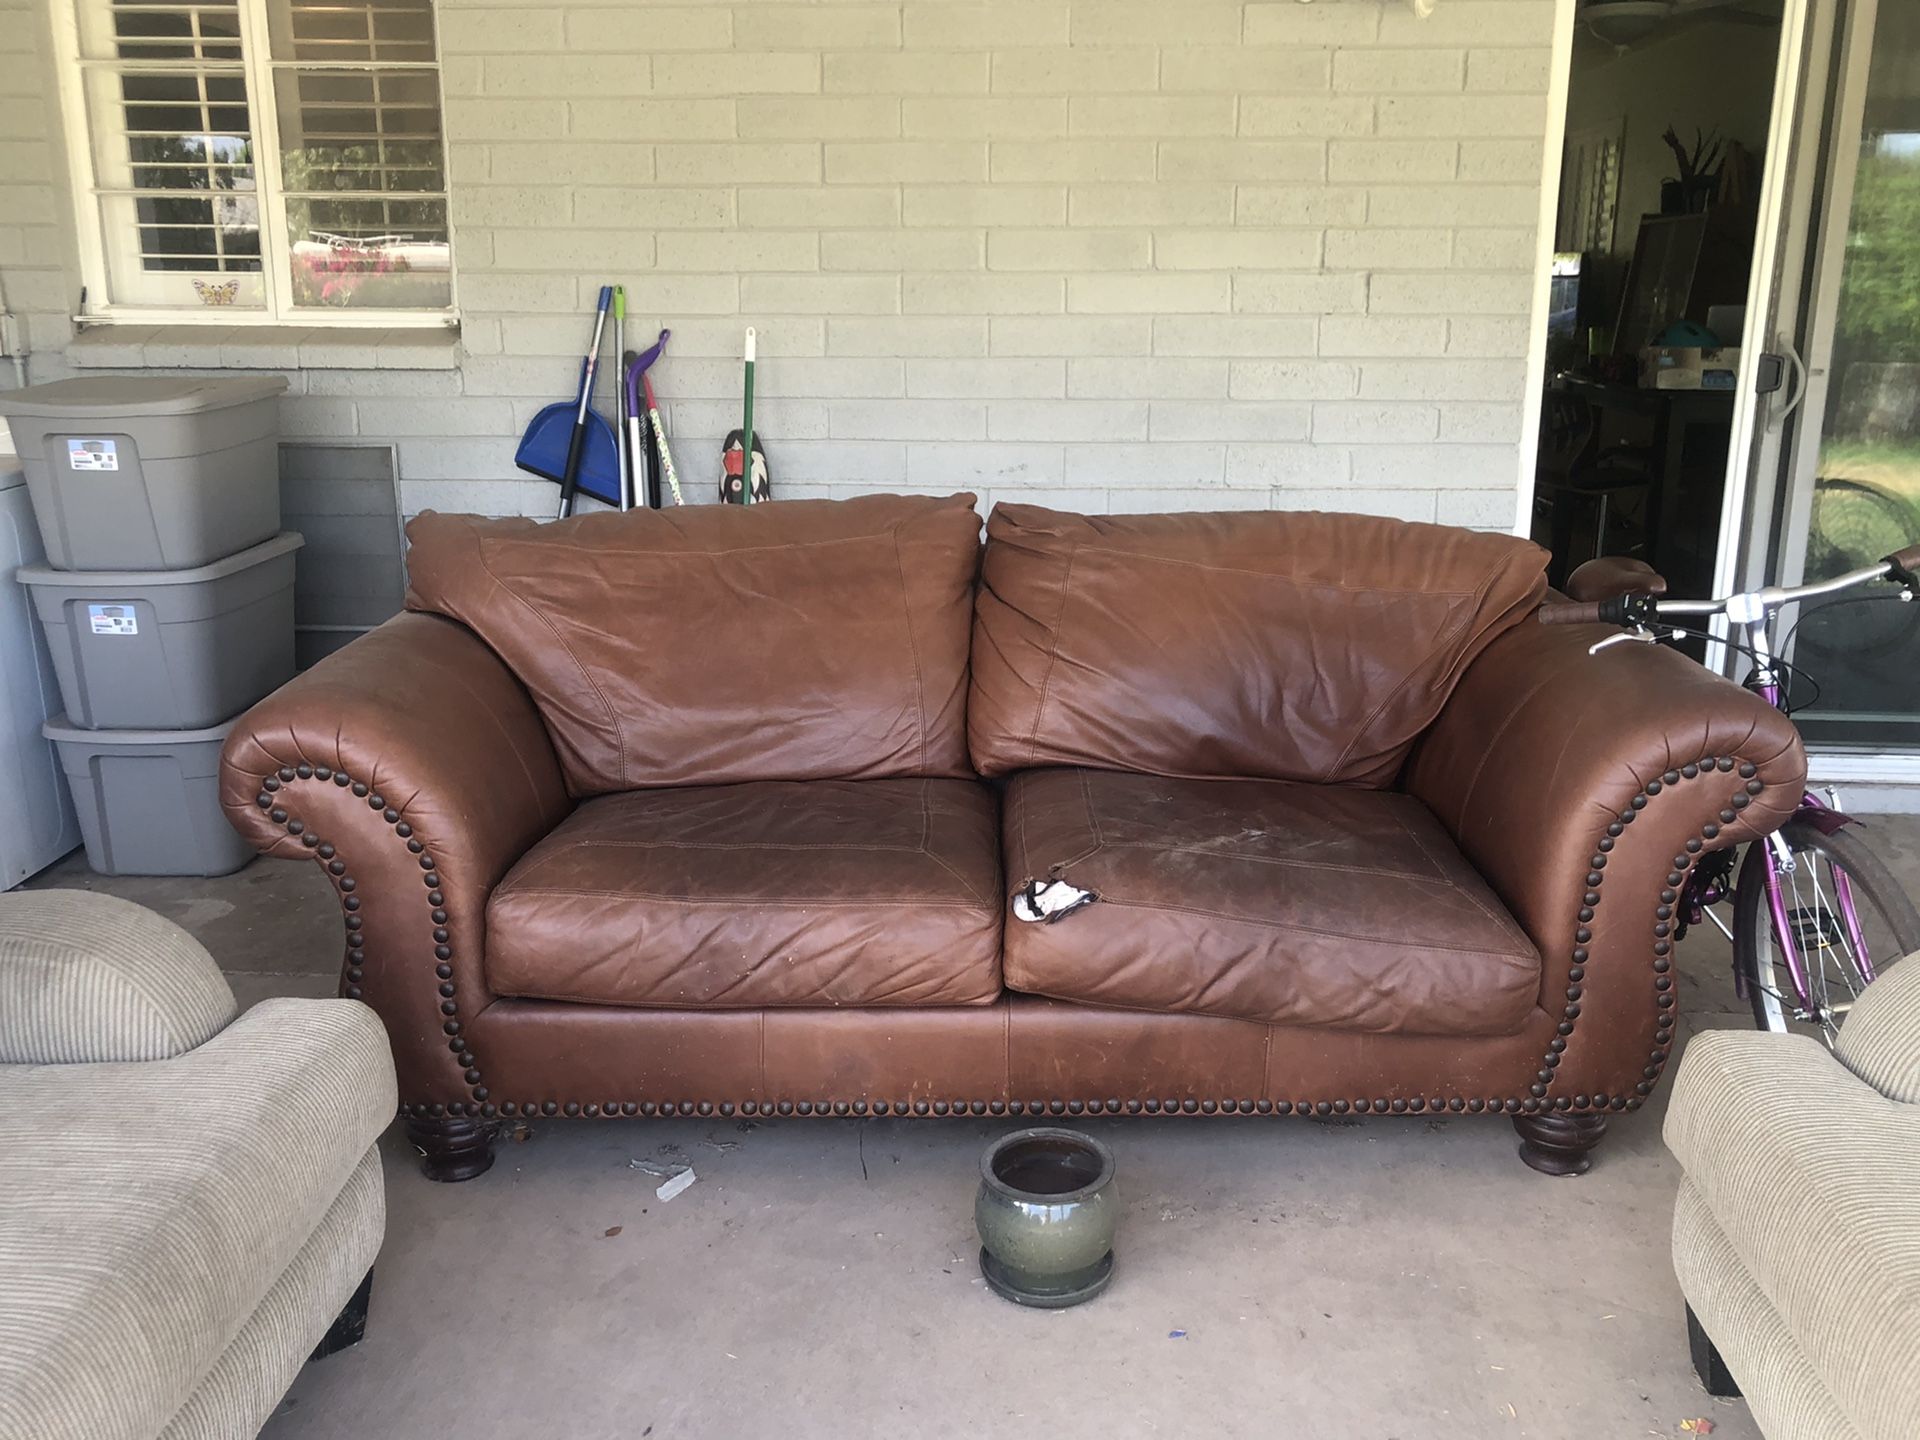 Multiple items - couches, table, papasan chair